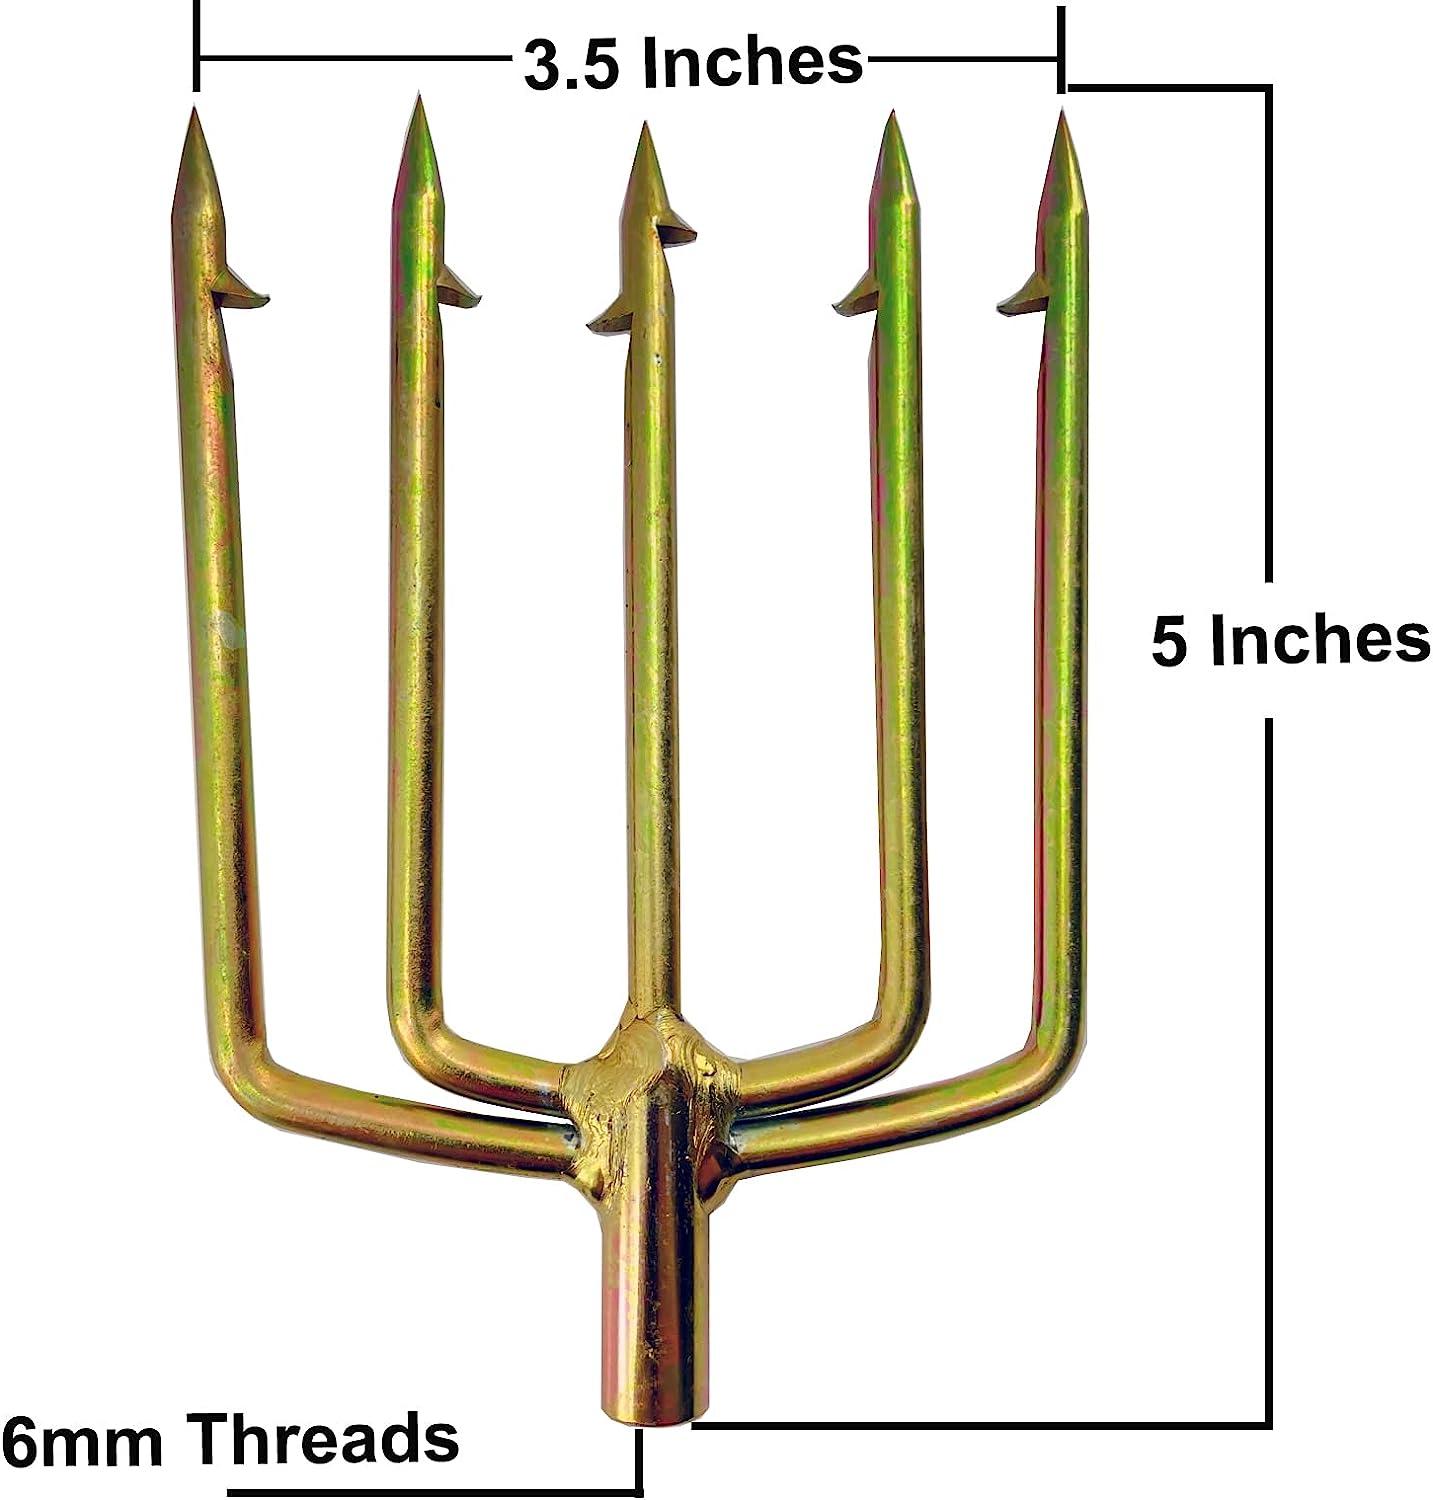 SPEARFISHING WORLD Multi-Prong Trident Harpoon Spear Tip for Hunting with  Speargun, Polespear and Hawaiian Sling with 5 Barbed Prongs.